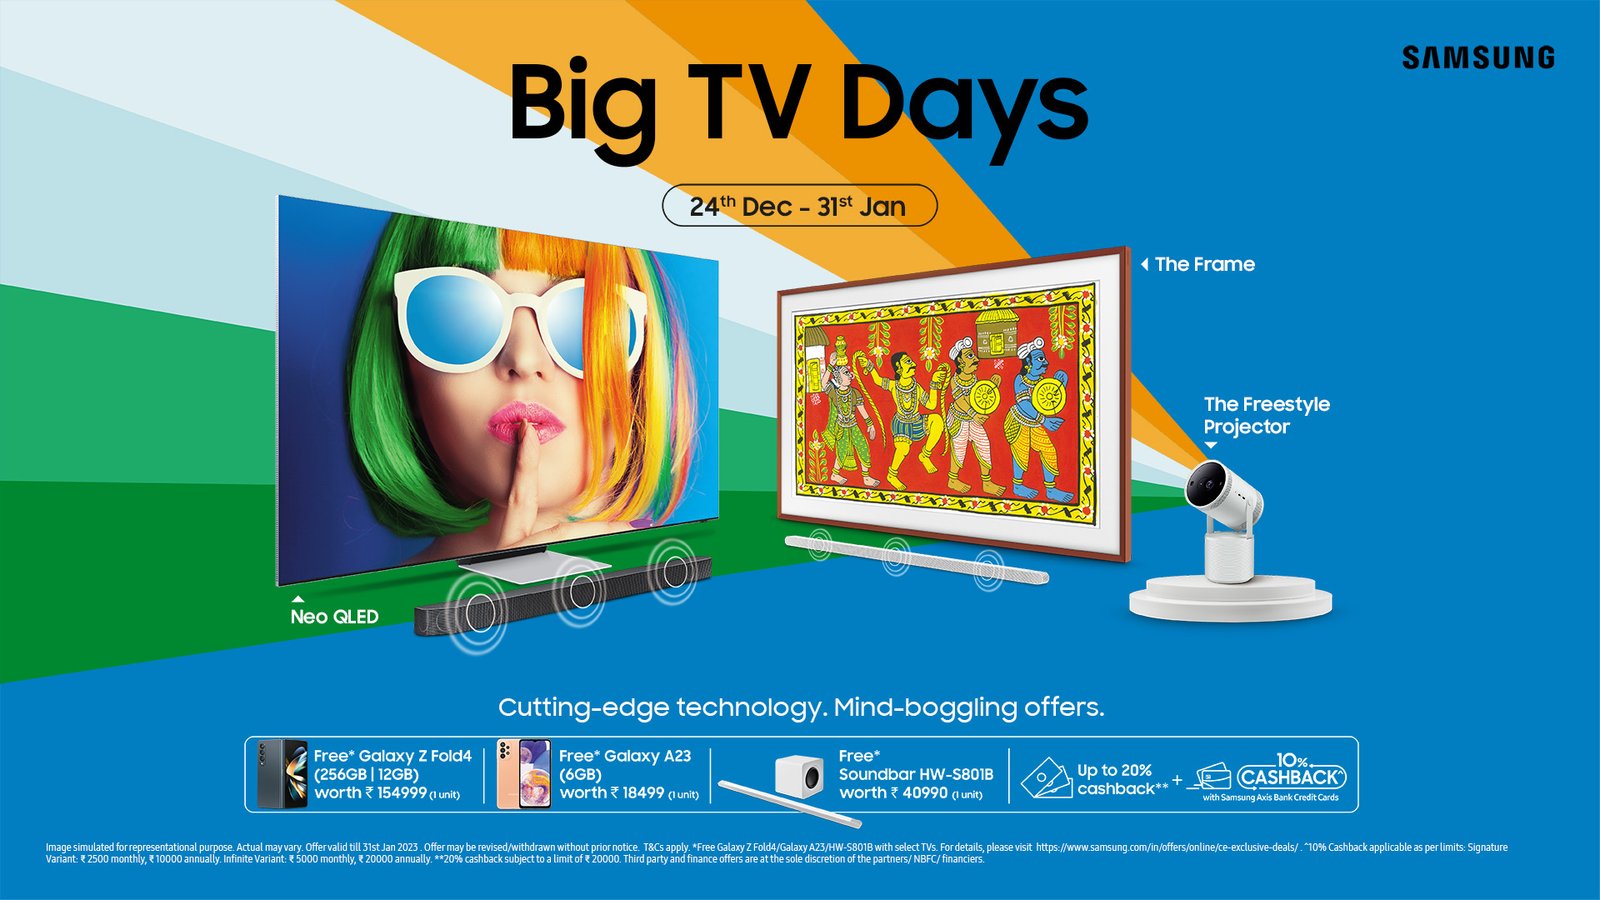 Get Big on Entertainment this New Year With Samsung ‘Big TV Days’; Enjoy Never Before Offers, Assured Gifts, Cashback & More